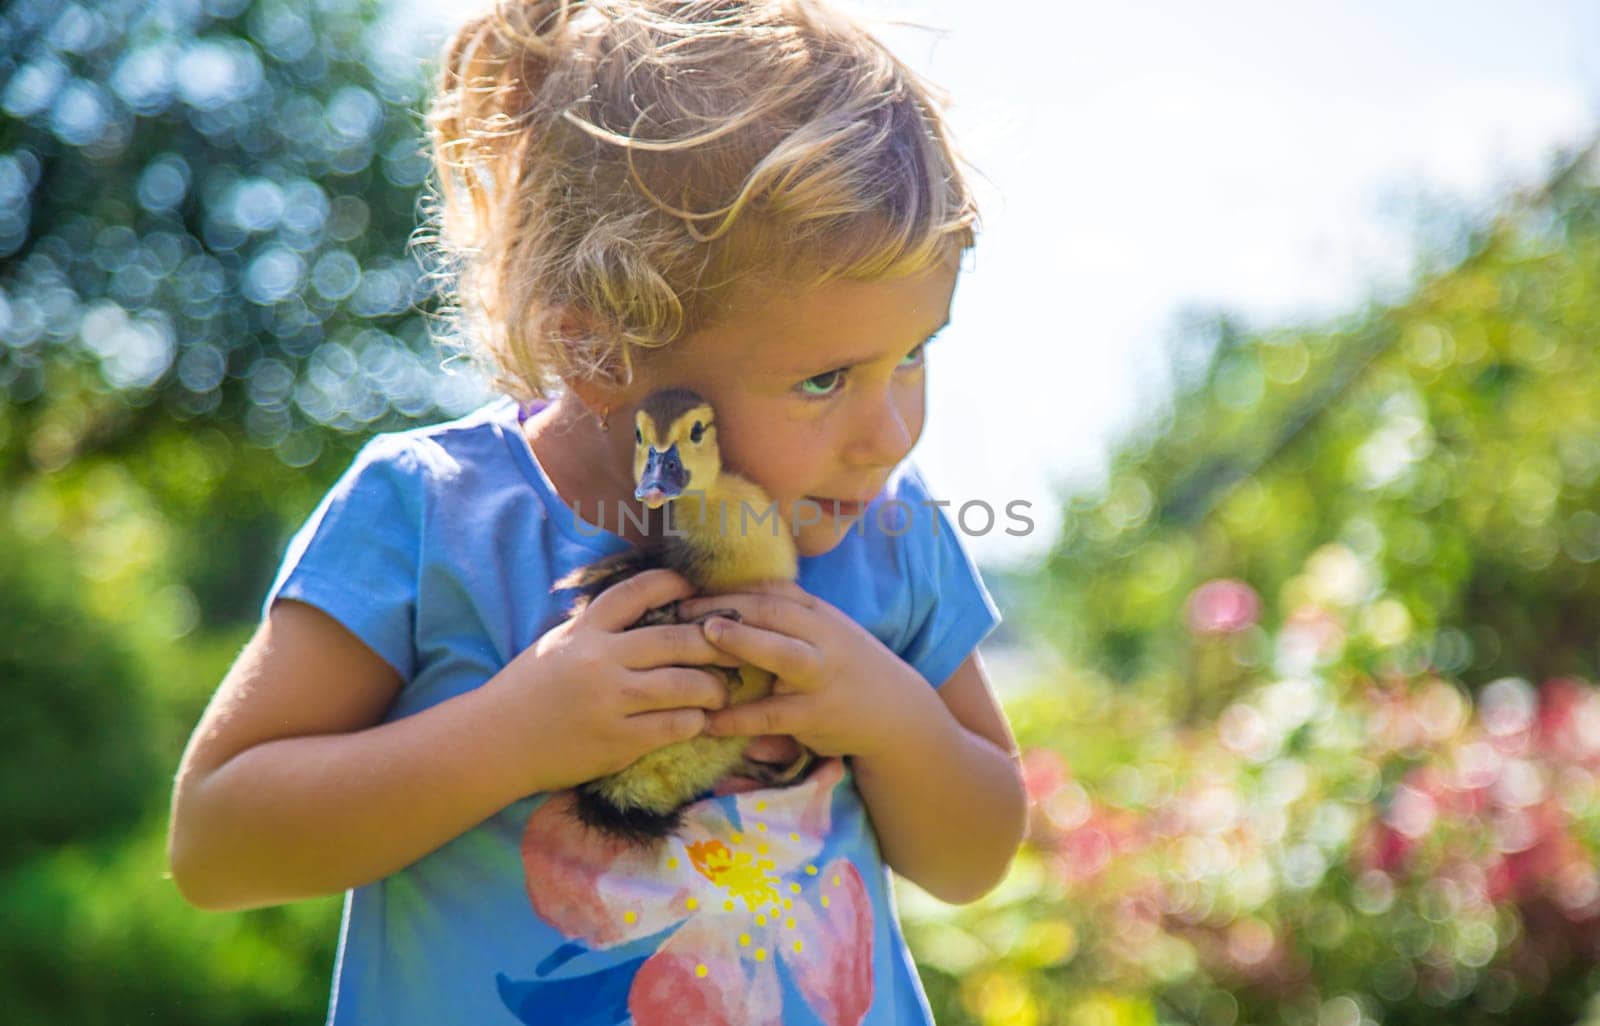 A child plays with a duckling. Selective focus. by yanadjana